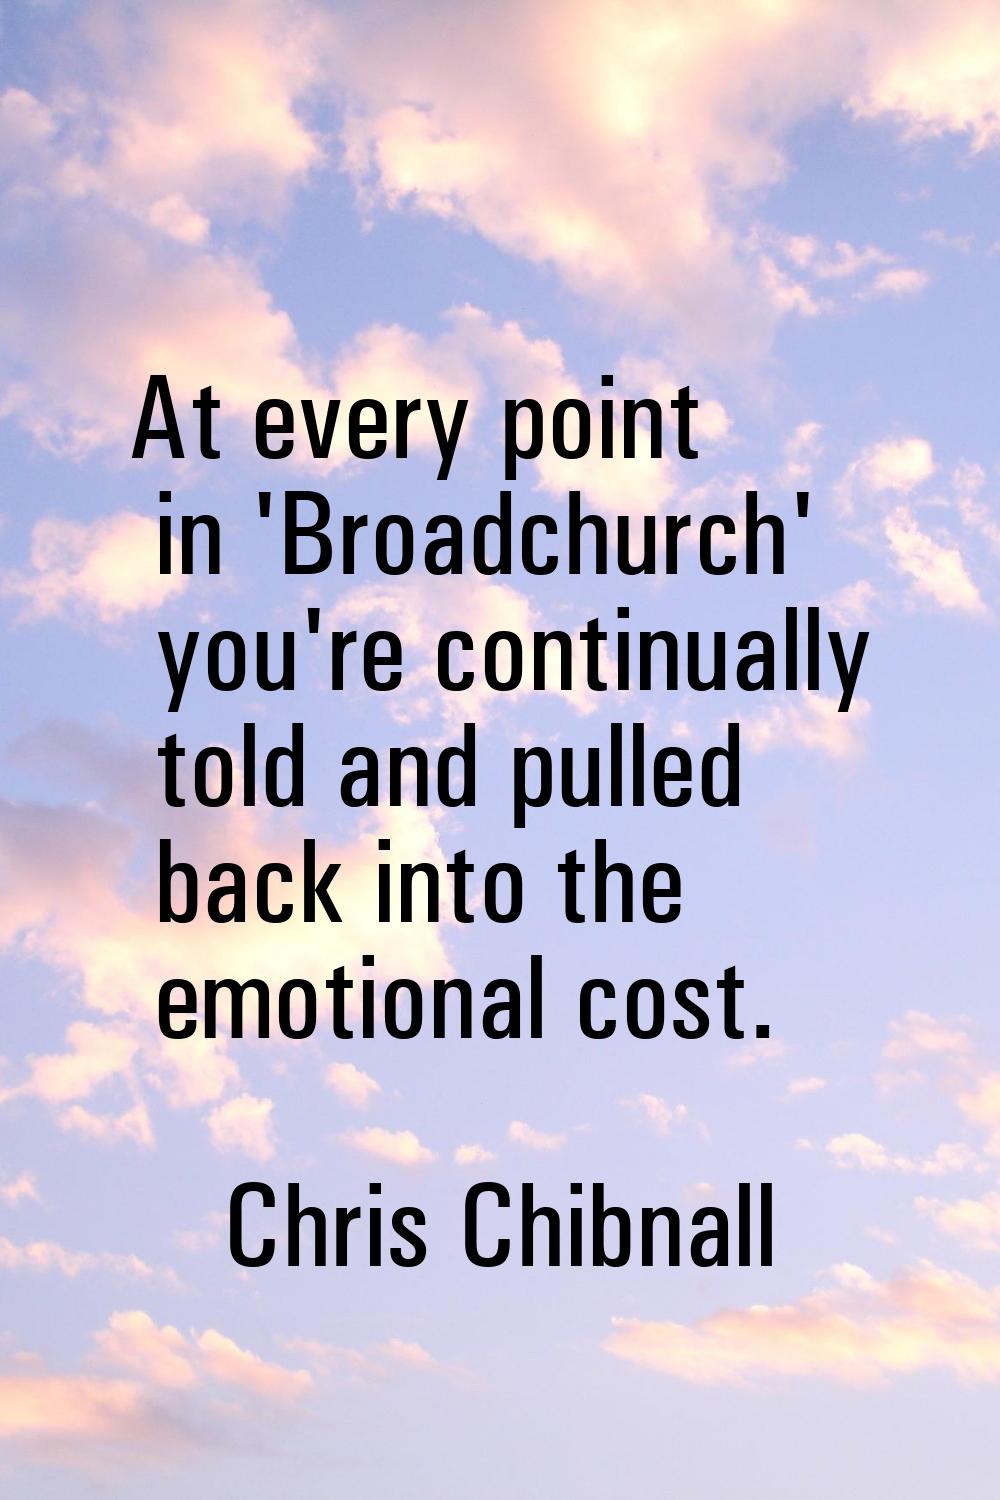 At every point in 'Broadchurch' you're continually told and pulled back into the emotional cost.